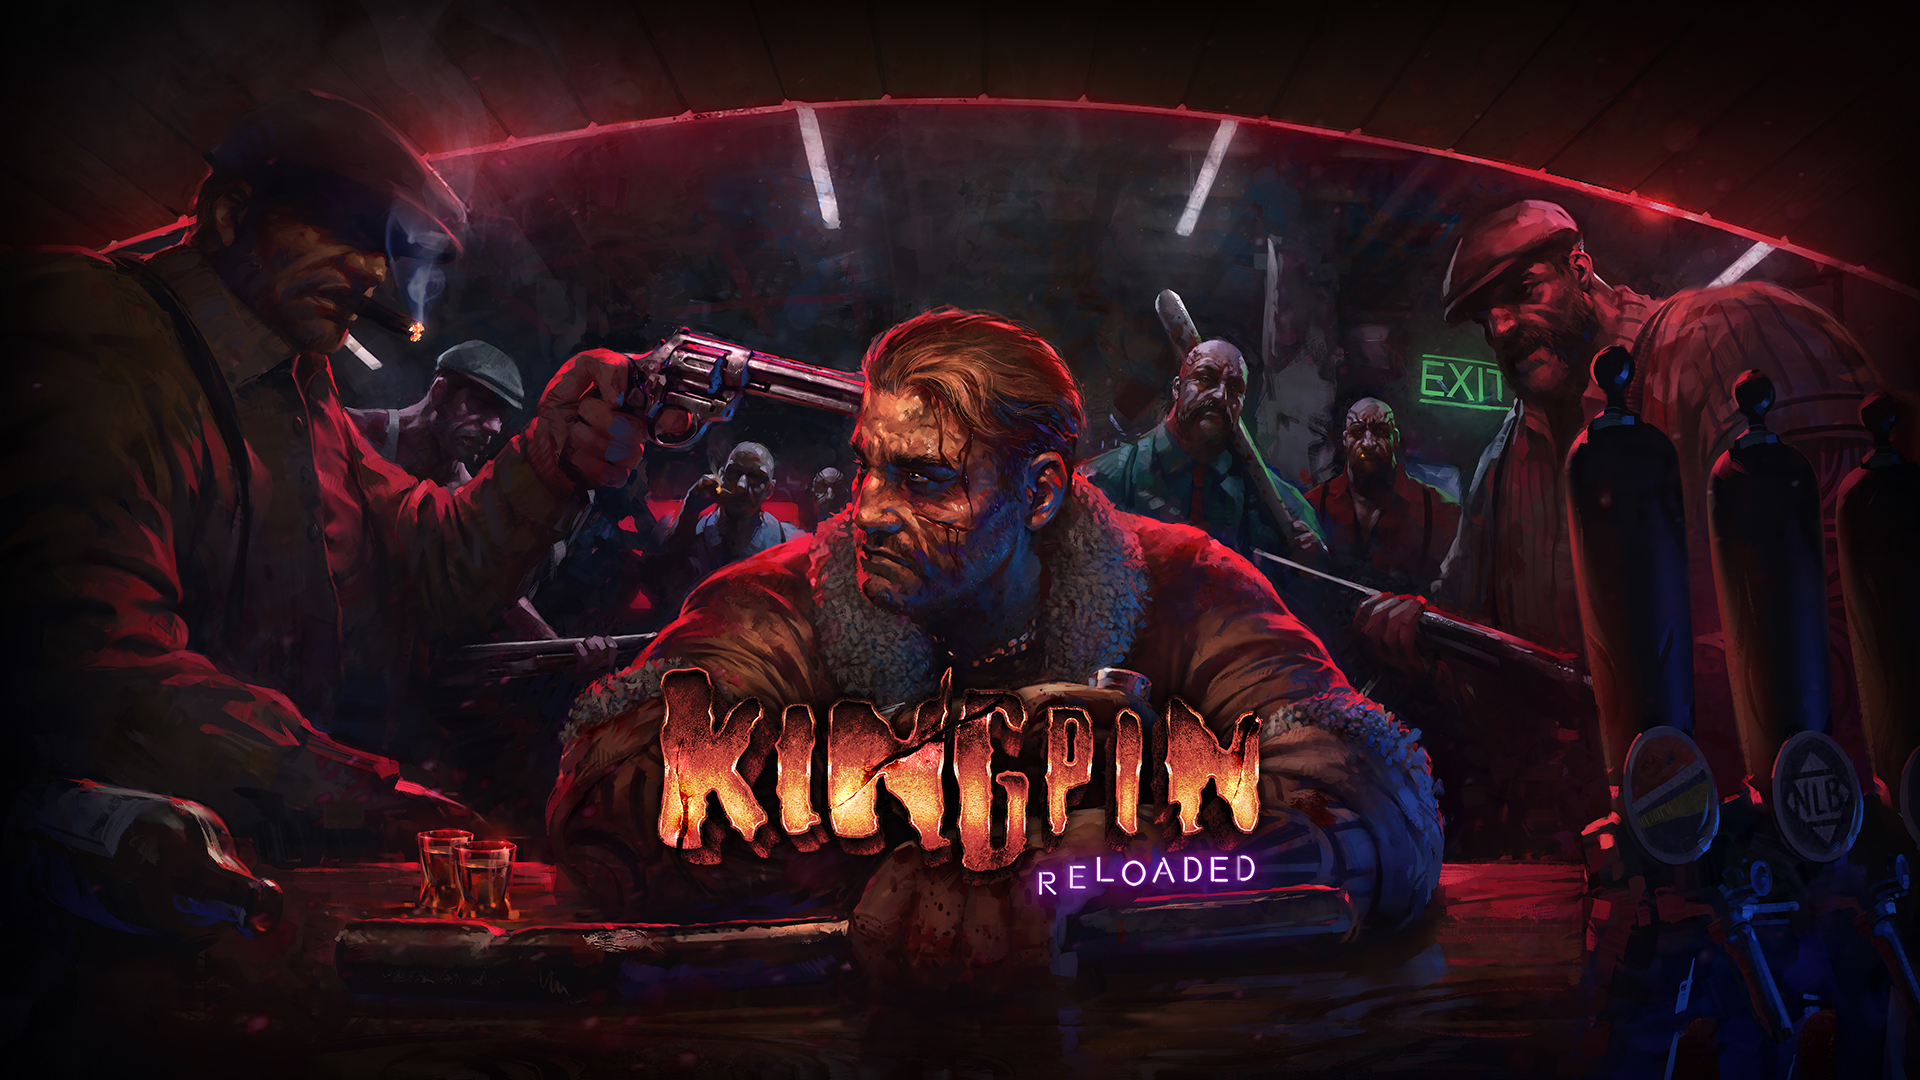 Kingpin: Reloaded launches in December